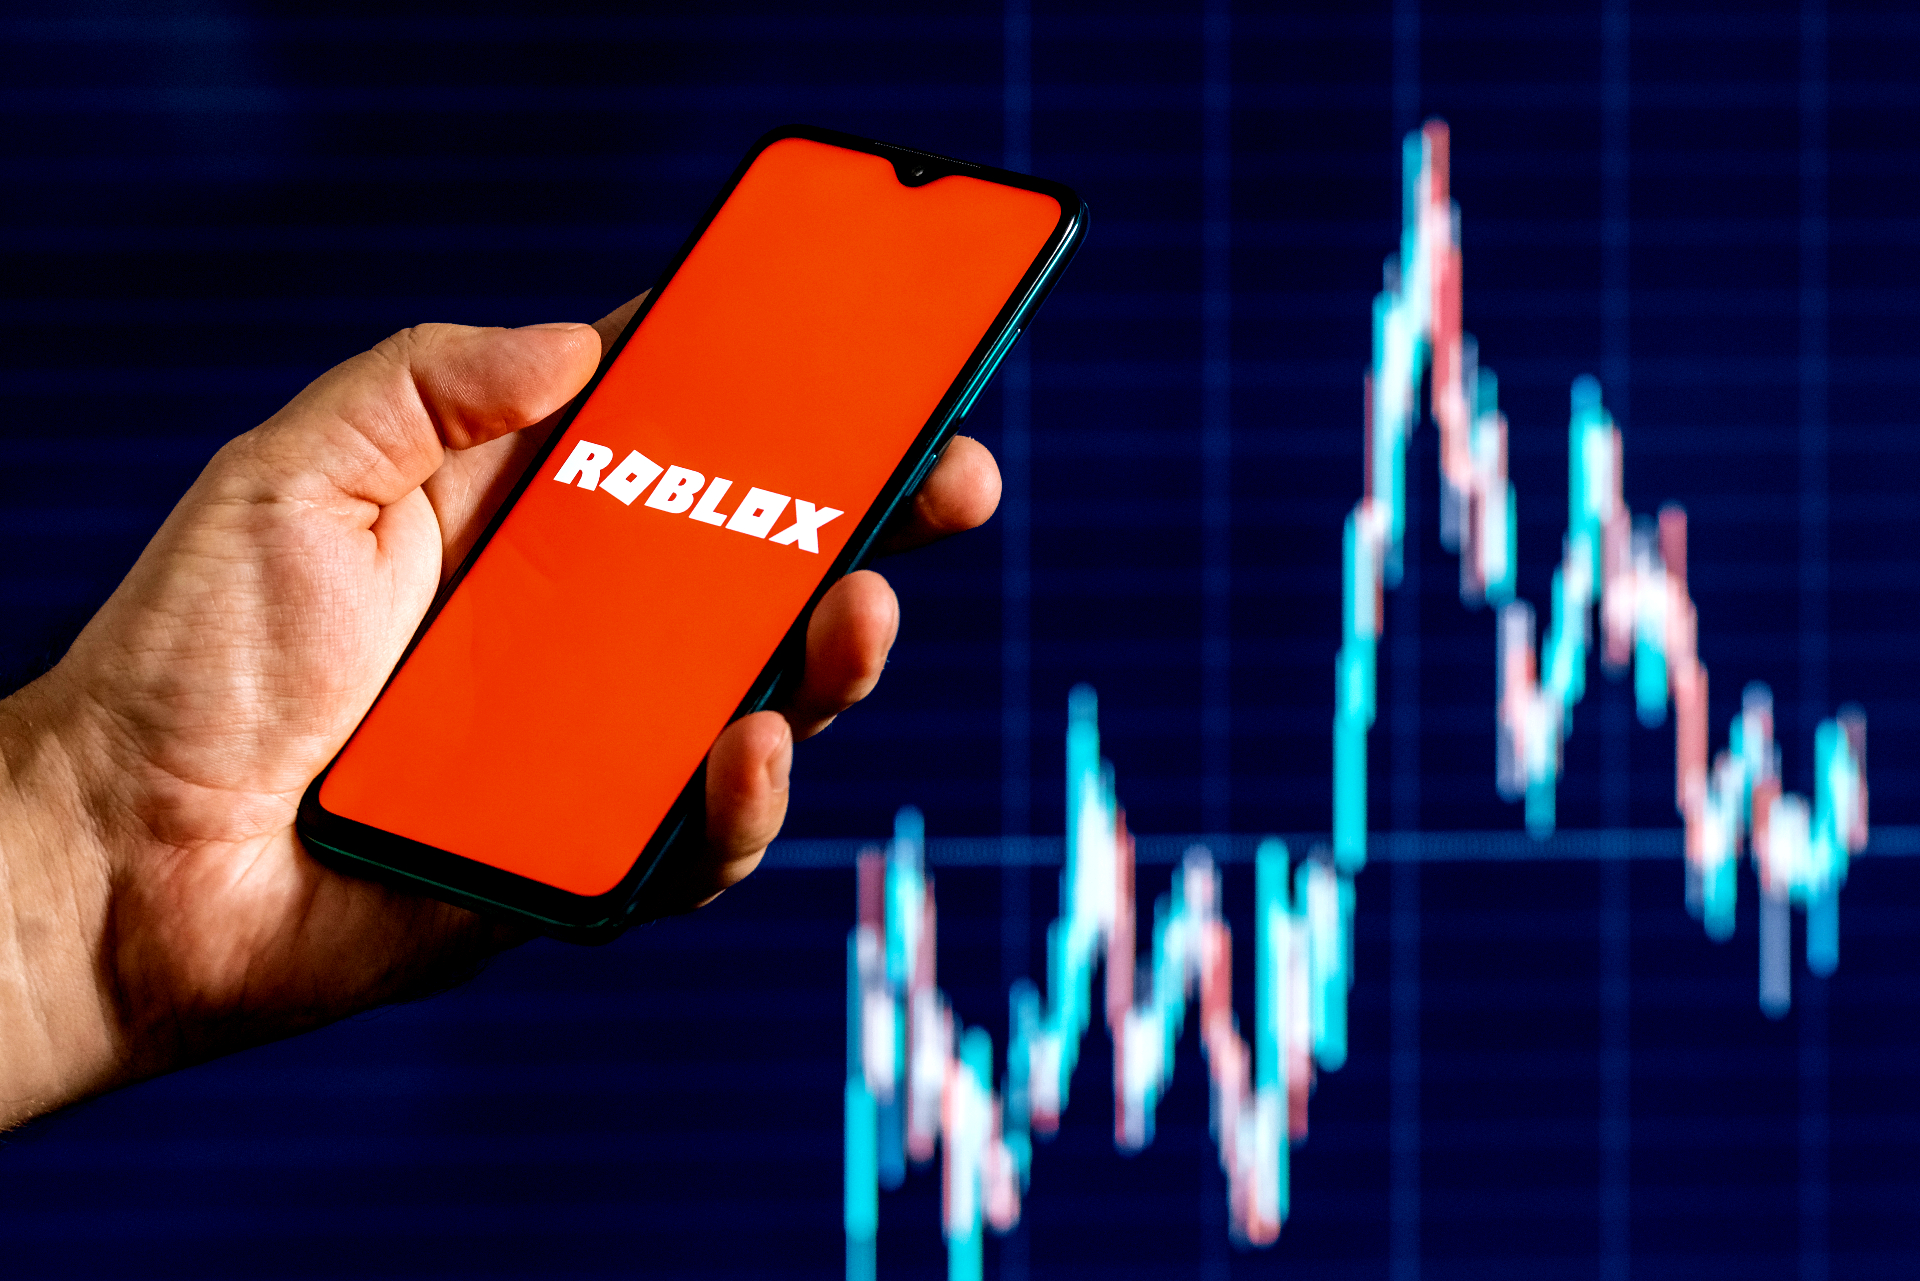 Roblox stock rebounds 50% after earnings report: What next?